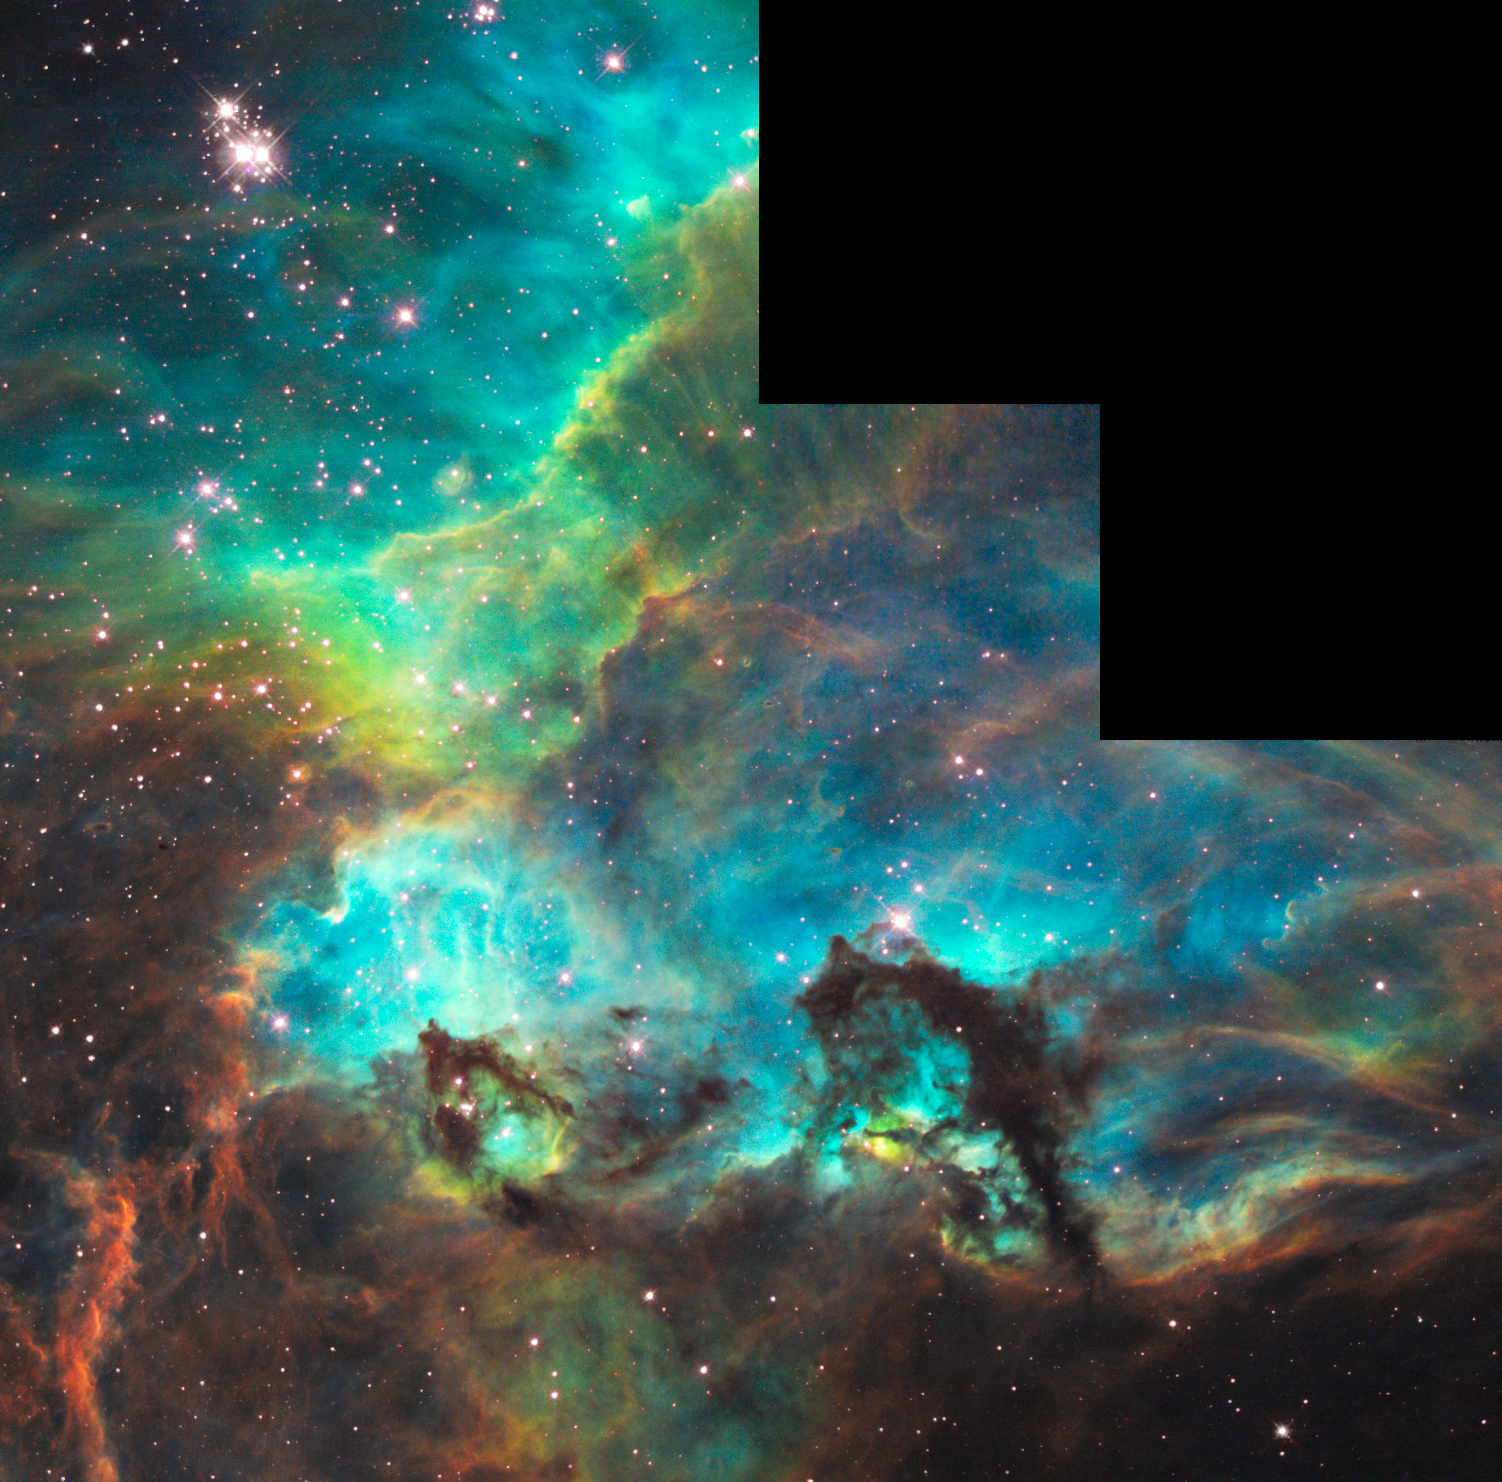 The Seahorse of the Large Magellanic Cloud